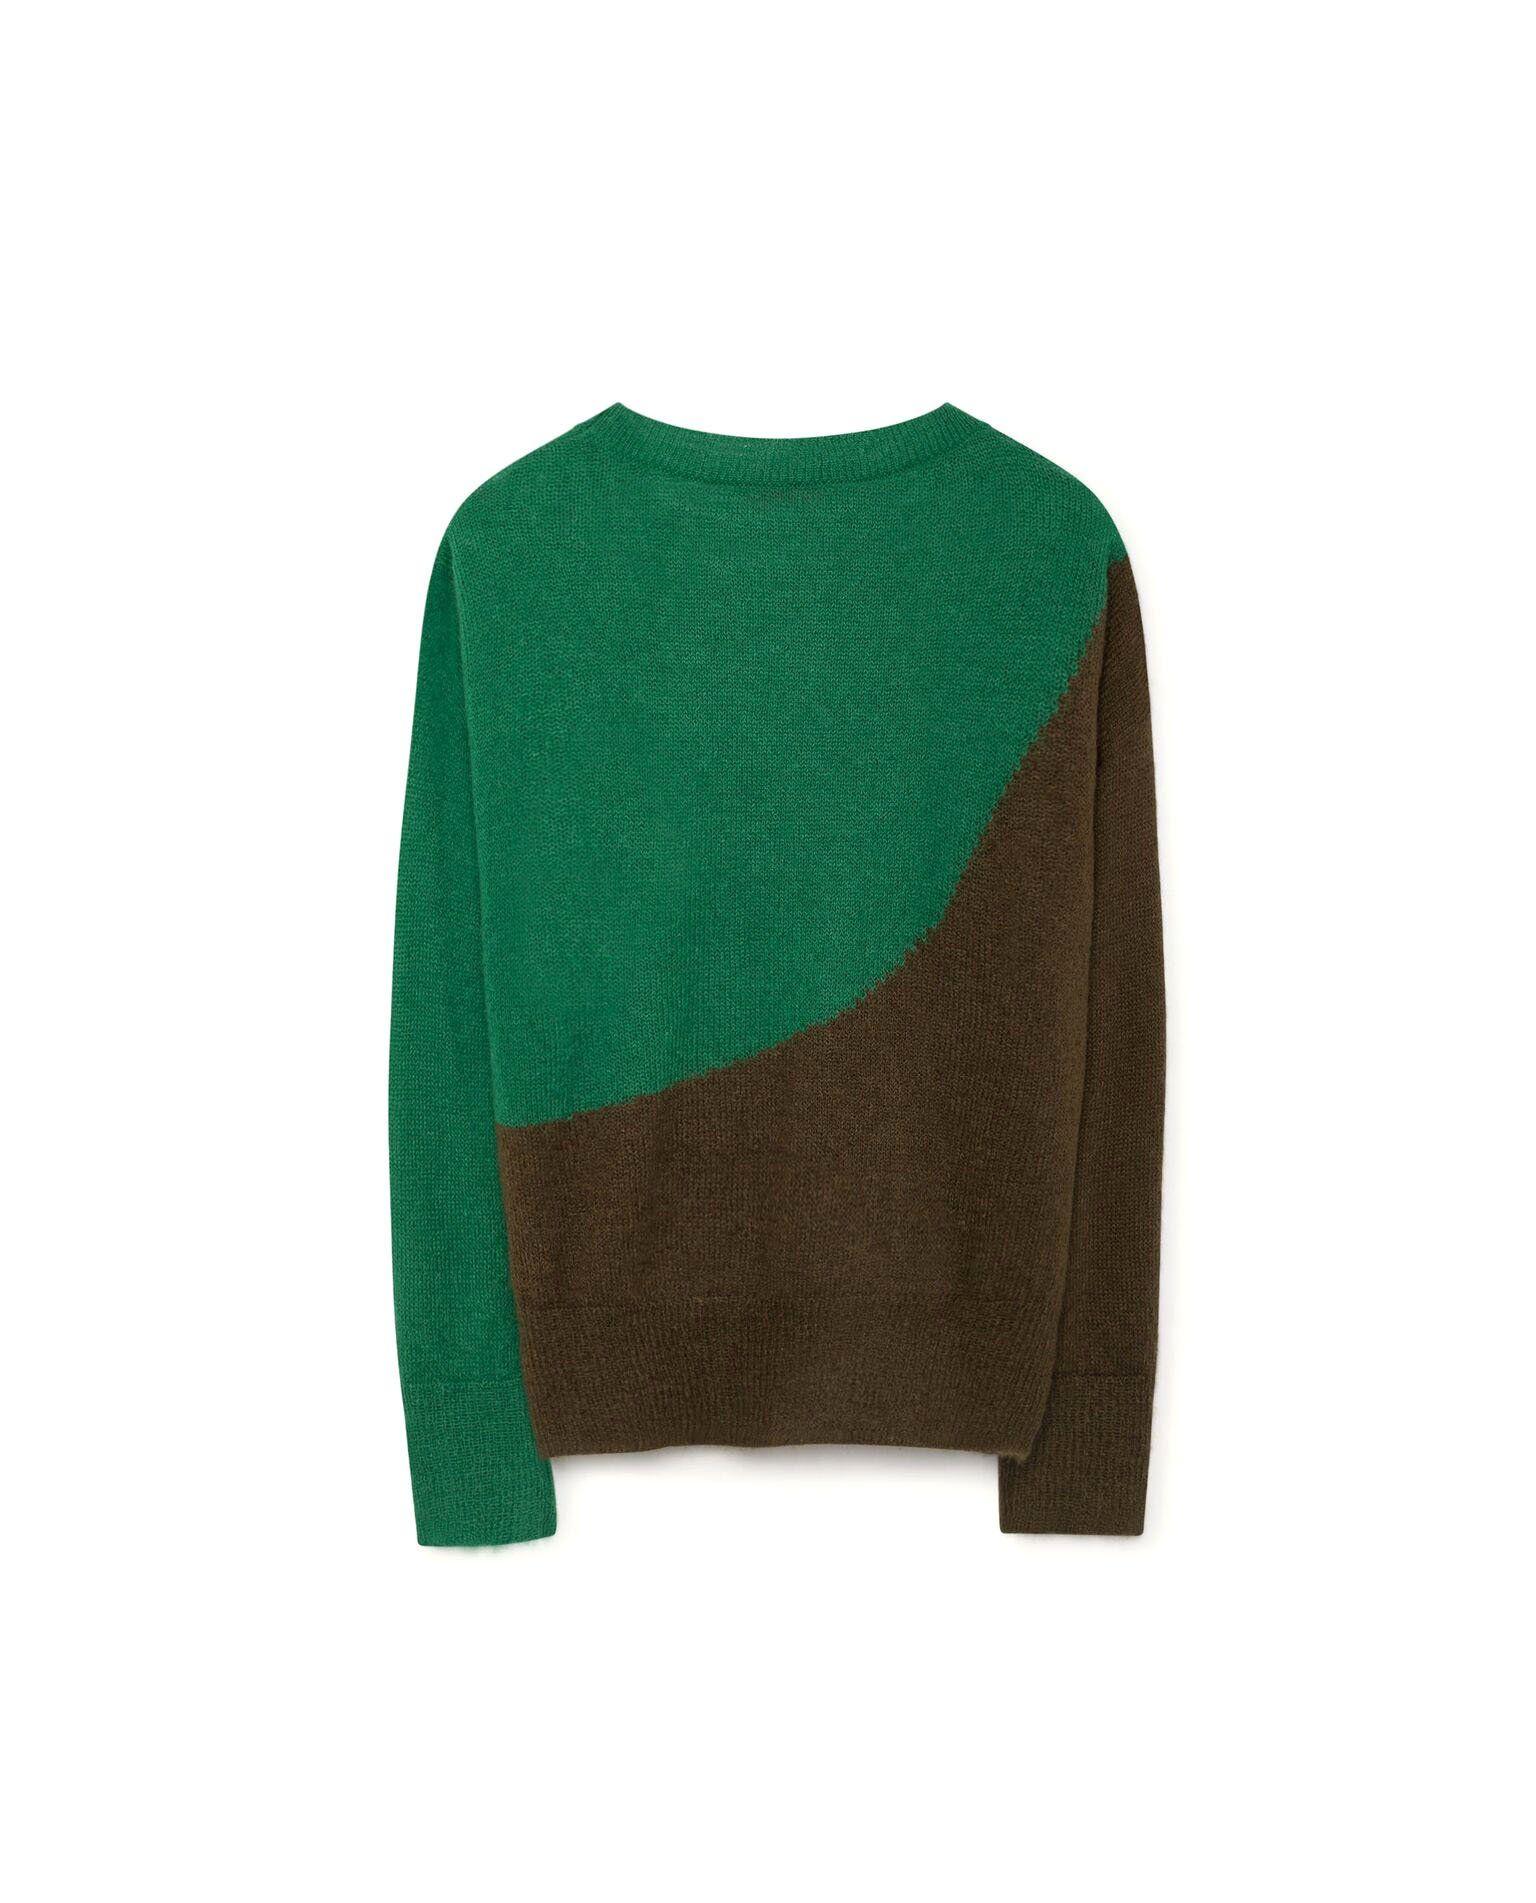 Green Triangle Clothing Logo - the animals observatory bicolor bull sweater electric green triangle ...